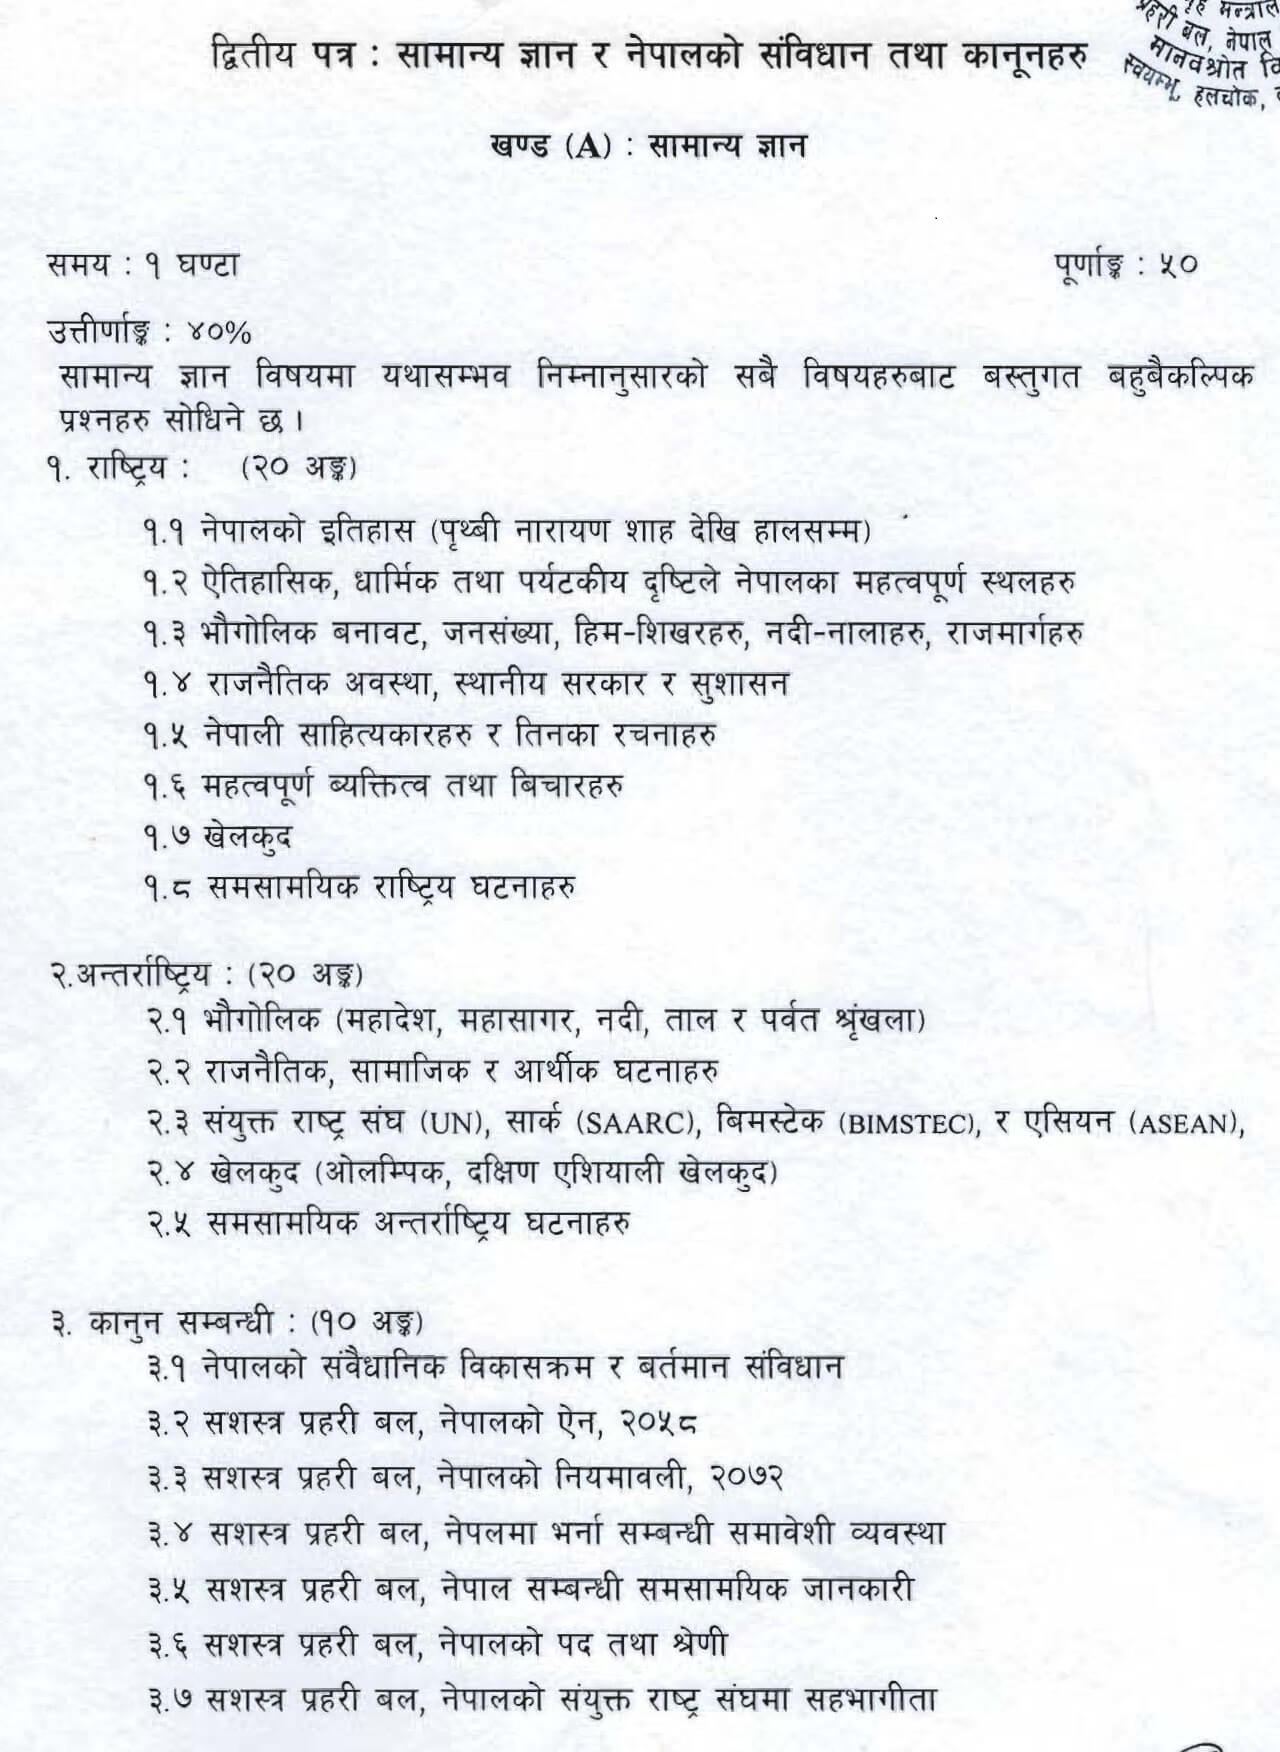 APF Inspector Syllabus PDF. Armed Police Force Inspector Syllabus. Sasastra Prahari Inspector Syllabus. APF Nepal Syllabus PDF. APF GOV NP Syllabus